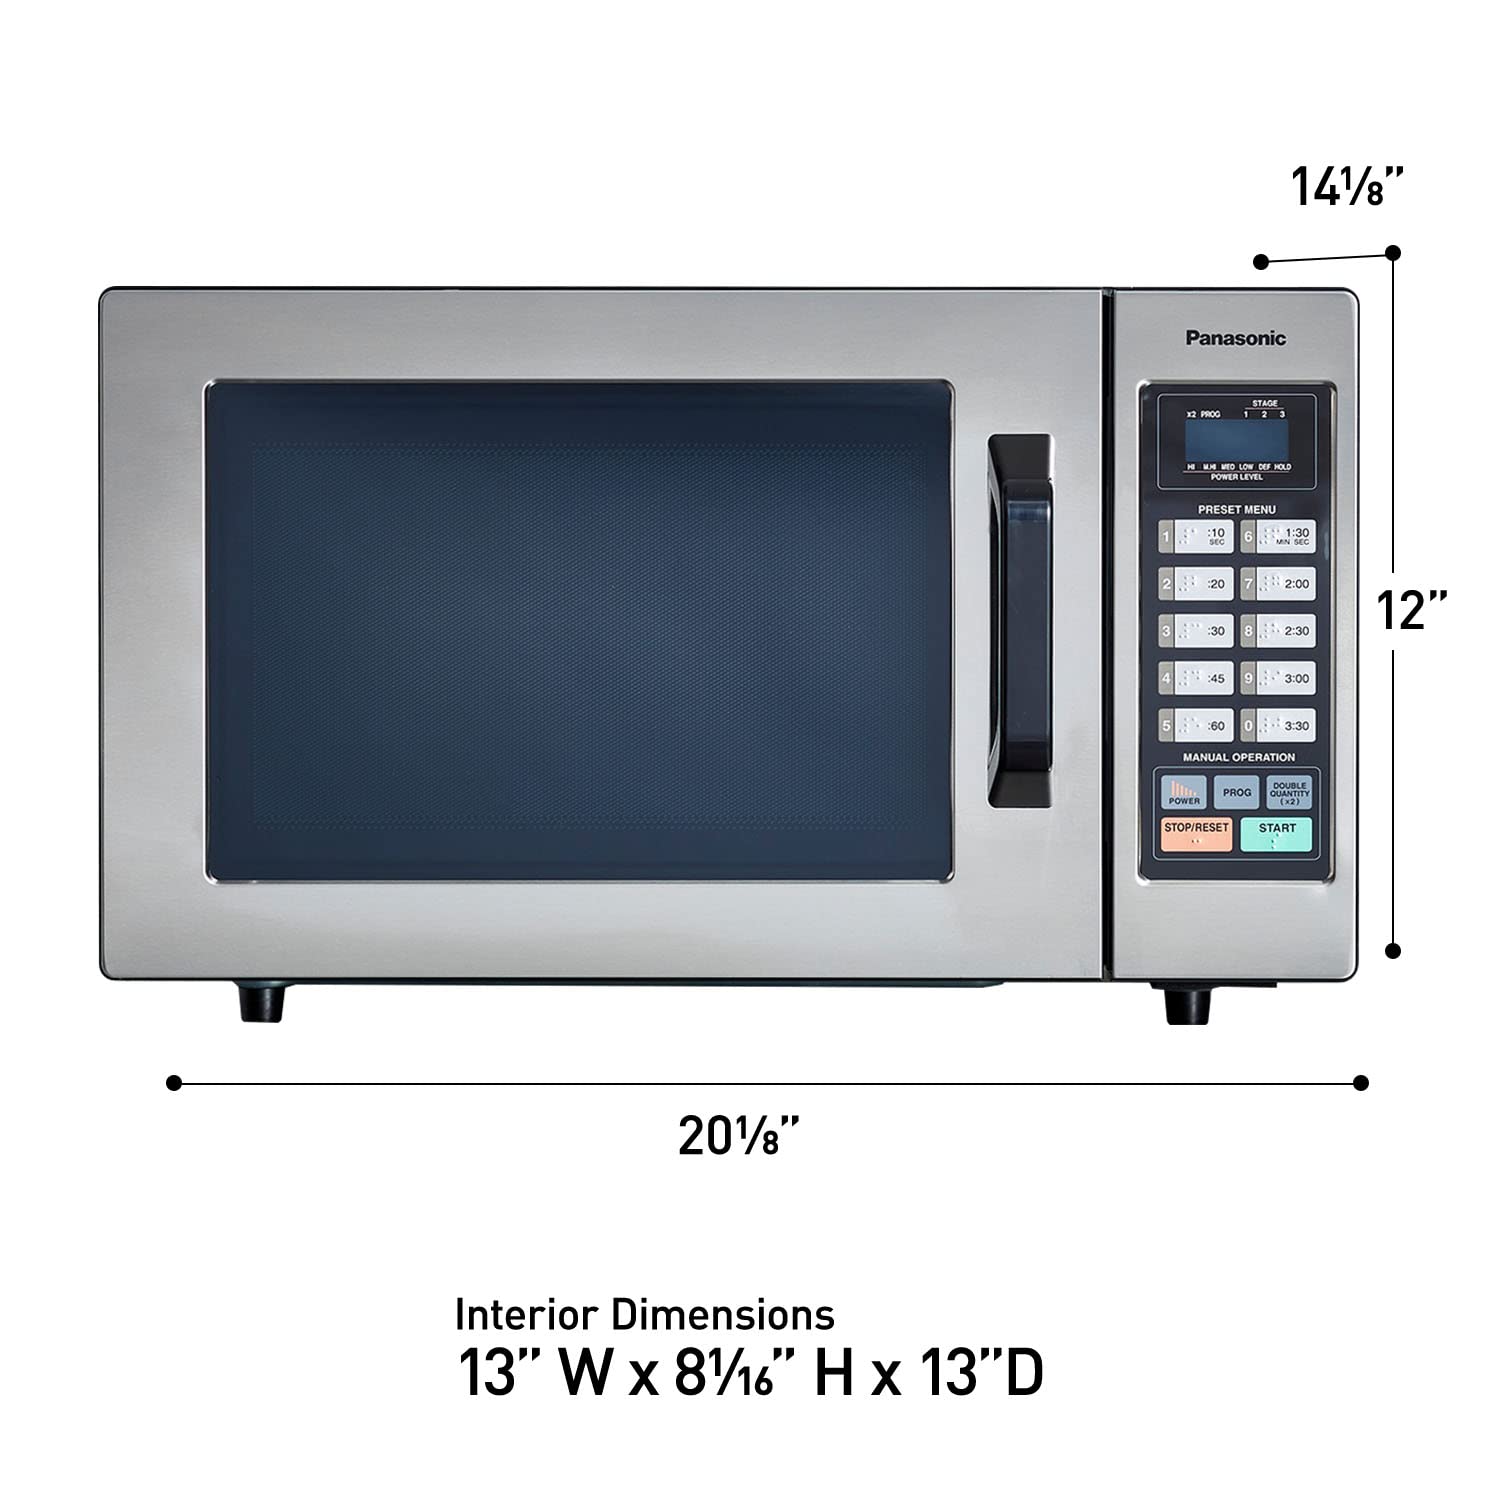 Panasonic Countertop Commercial Microwave Oven with 10 Programmable Memory and Touch Screen Control, 1000W of Cooking Power - NE-1054F - 0.8 Cu. Ft (Stainless Steel)